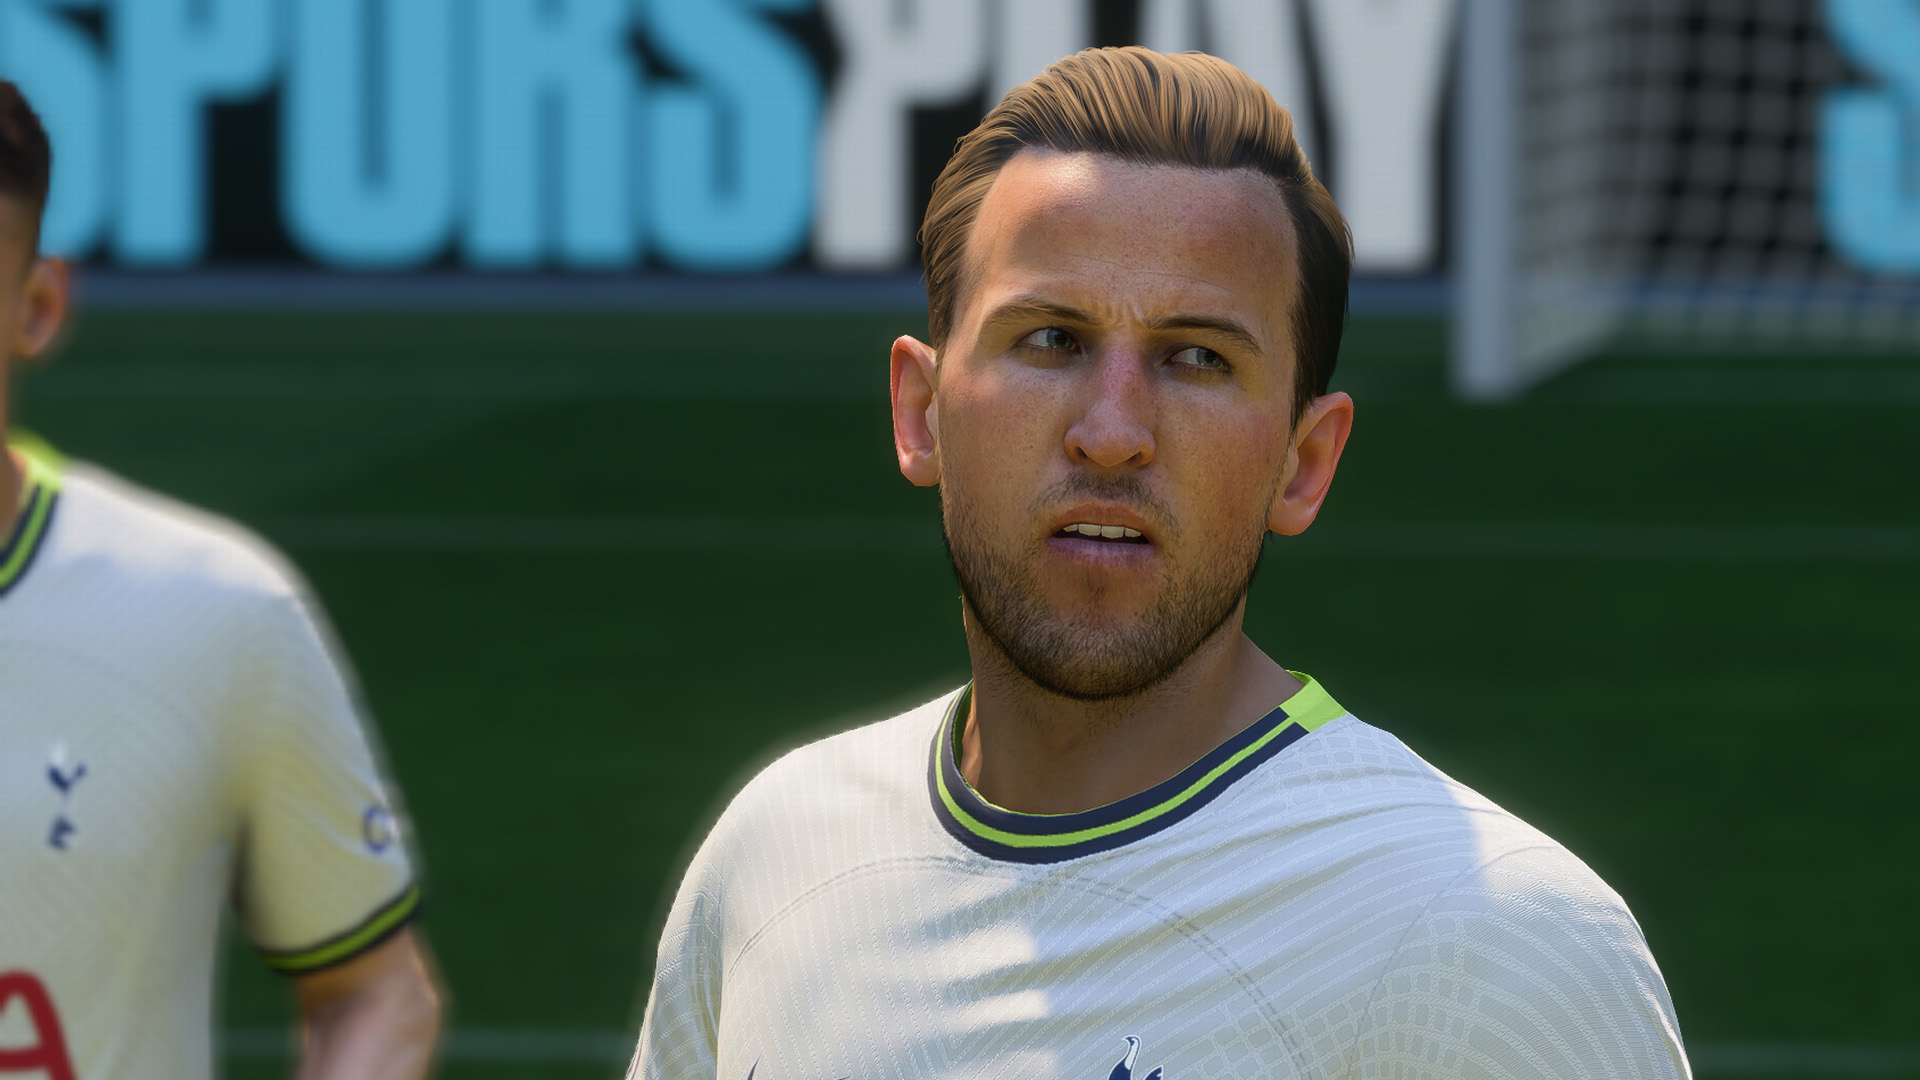 FIFA 23 Career Mode new features include real managers and playable  highlights - Mirror Online